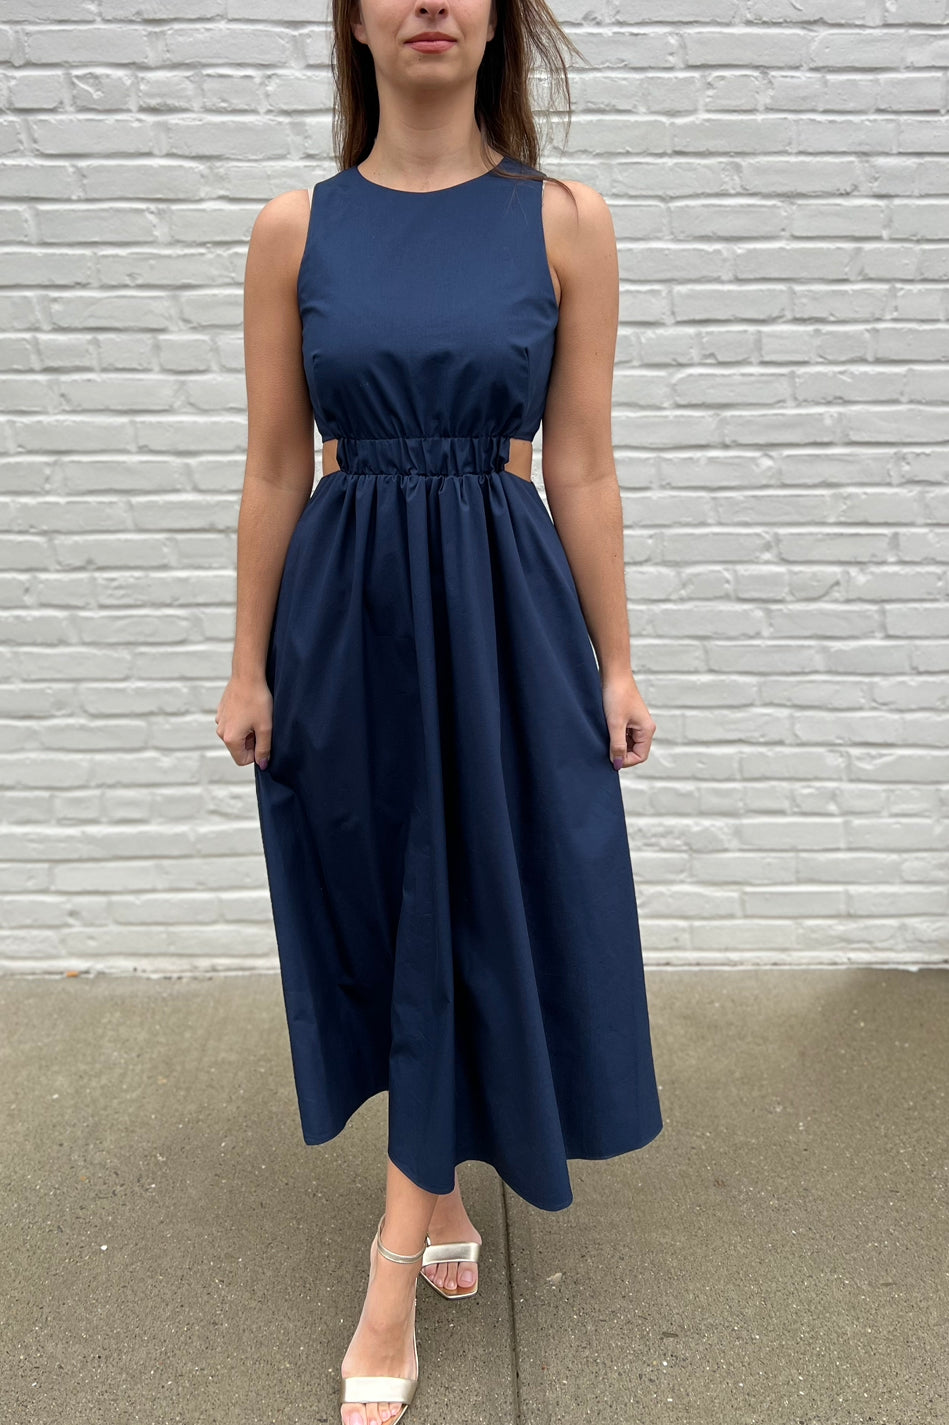 The Amber Cutout Dress in Navy